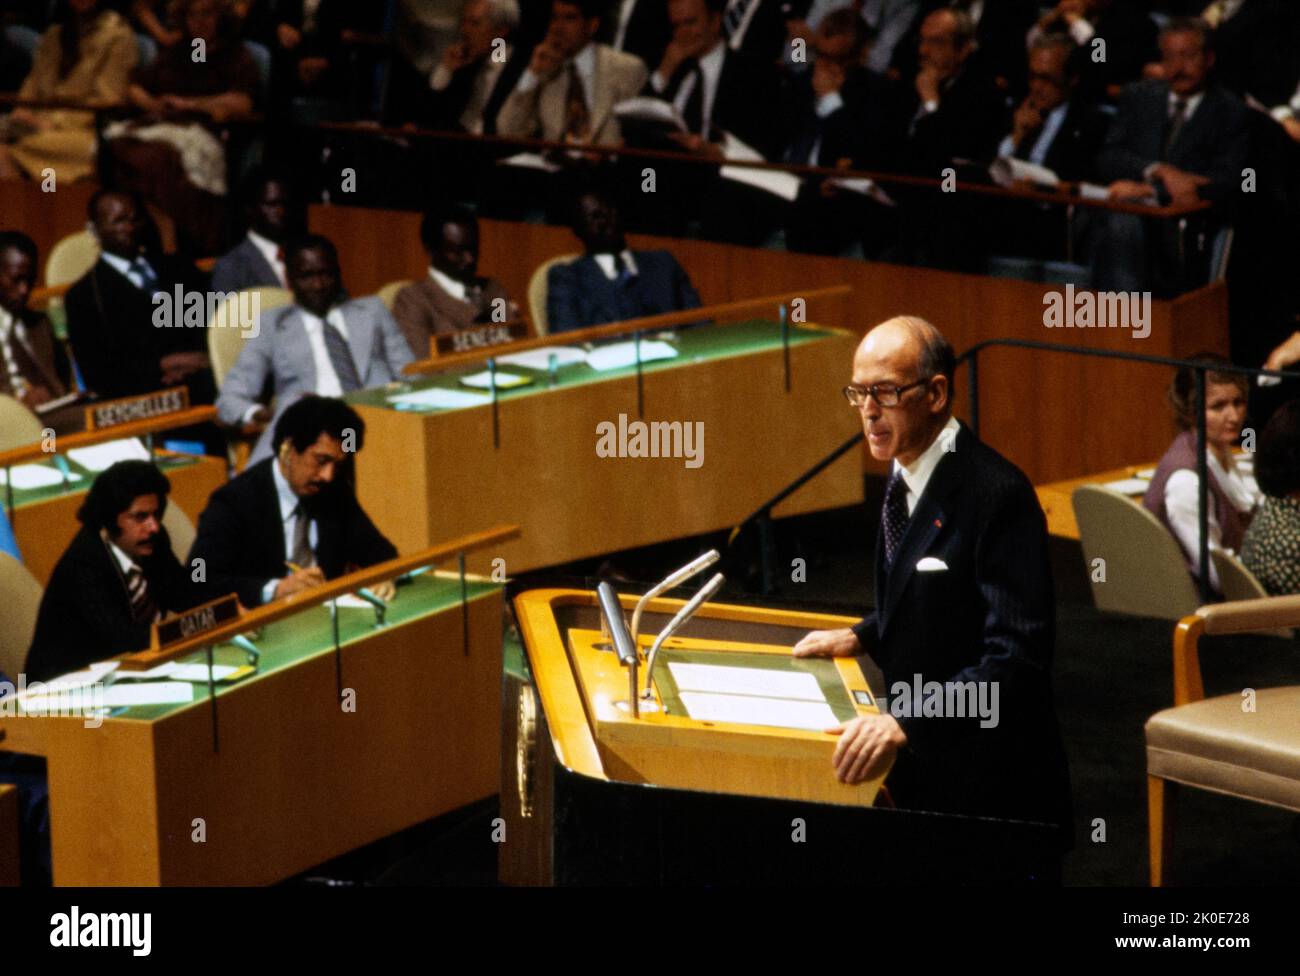 Valery Giscard d'Estaing (1926 - 2020), French politician who served as President of France from 1974 to 1981, seen addressing the United Nations in 1978. Stock Photo